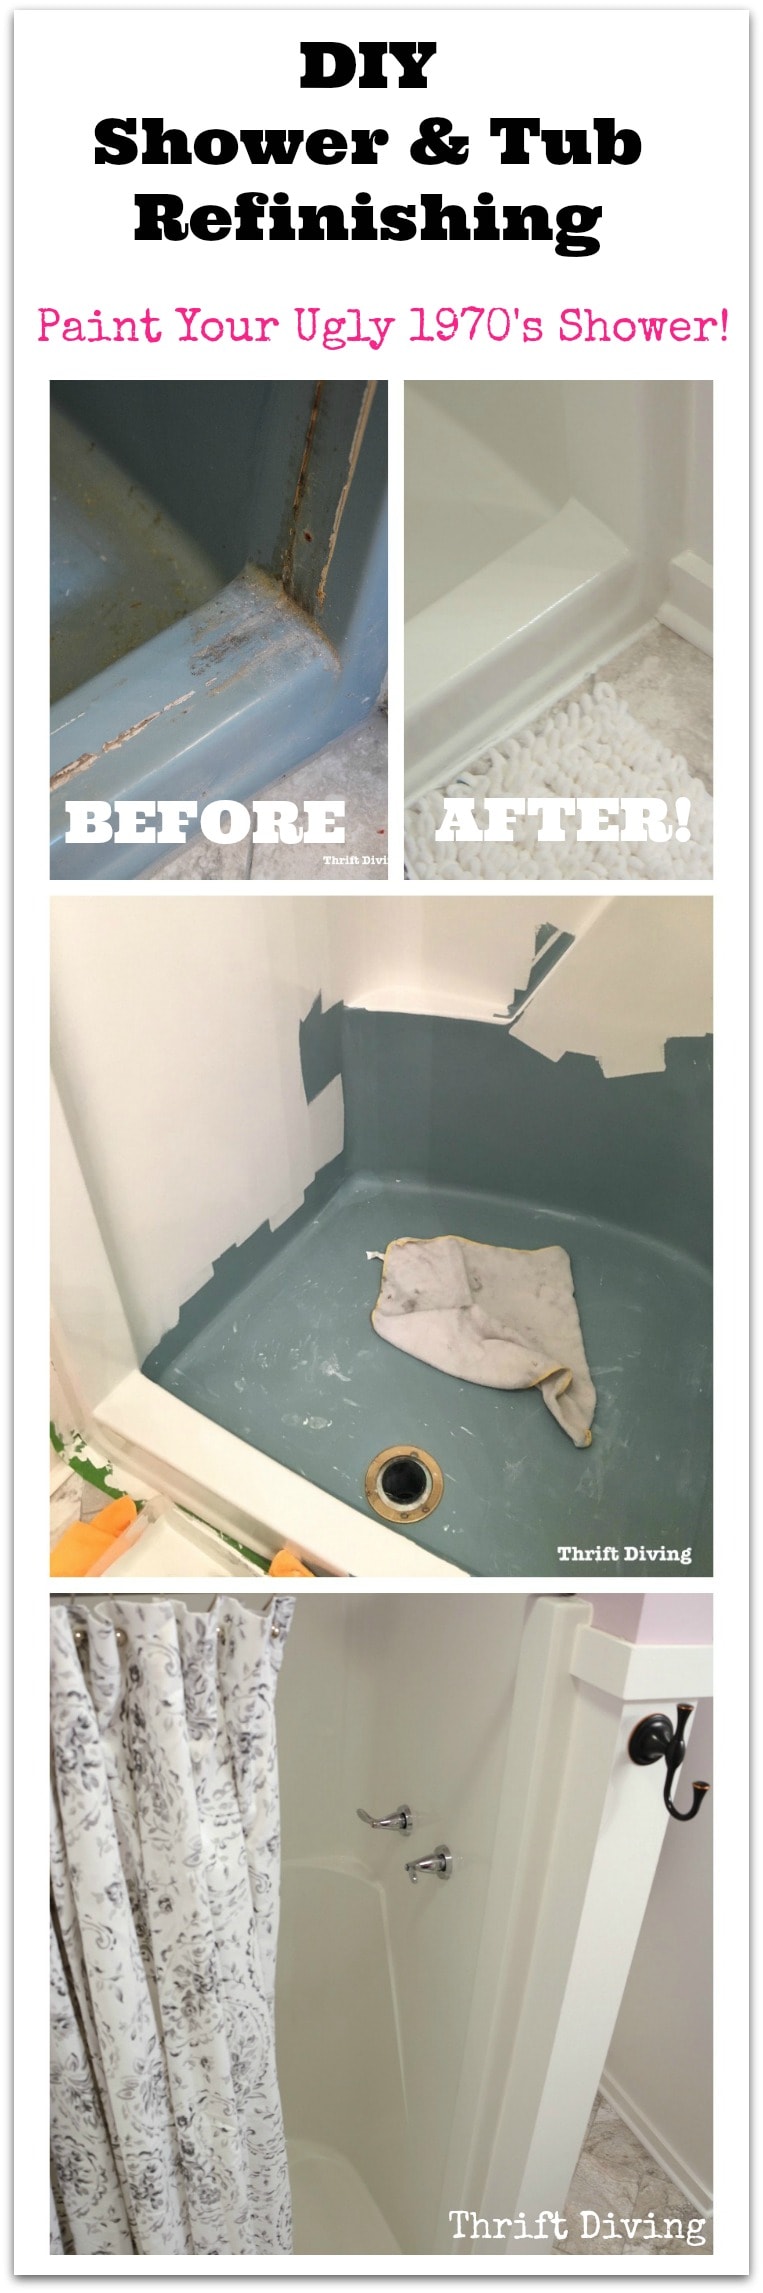 Shower and tub refinishing - Paint Your Old 1970's Shower White - Thrift Diving Blog